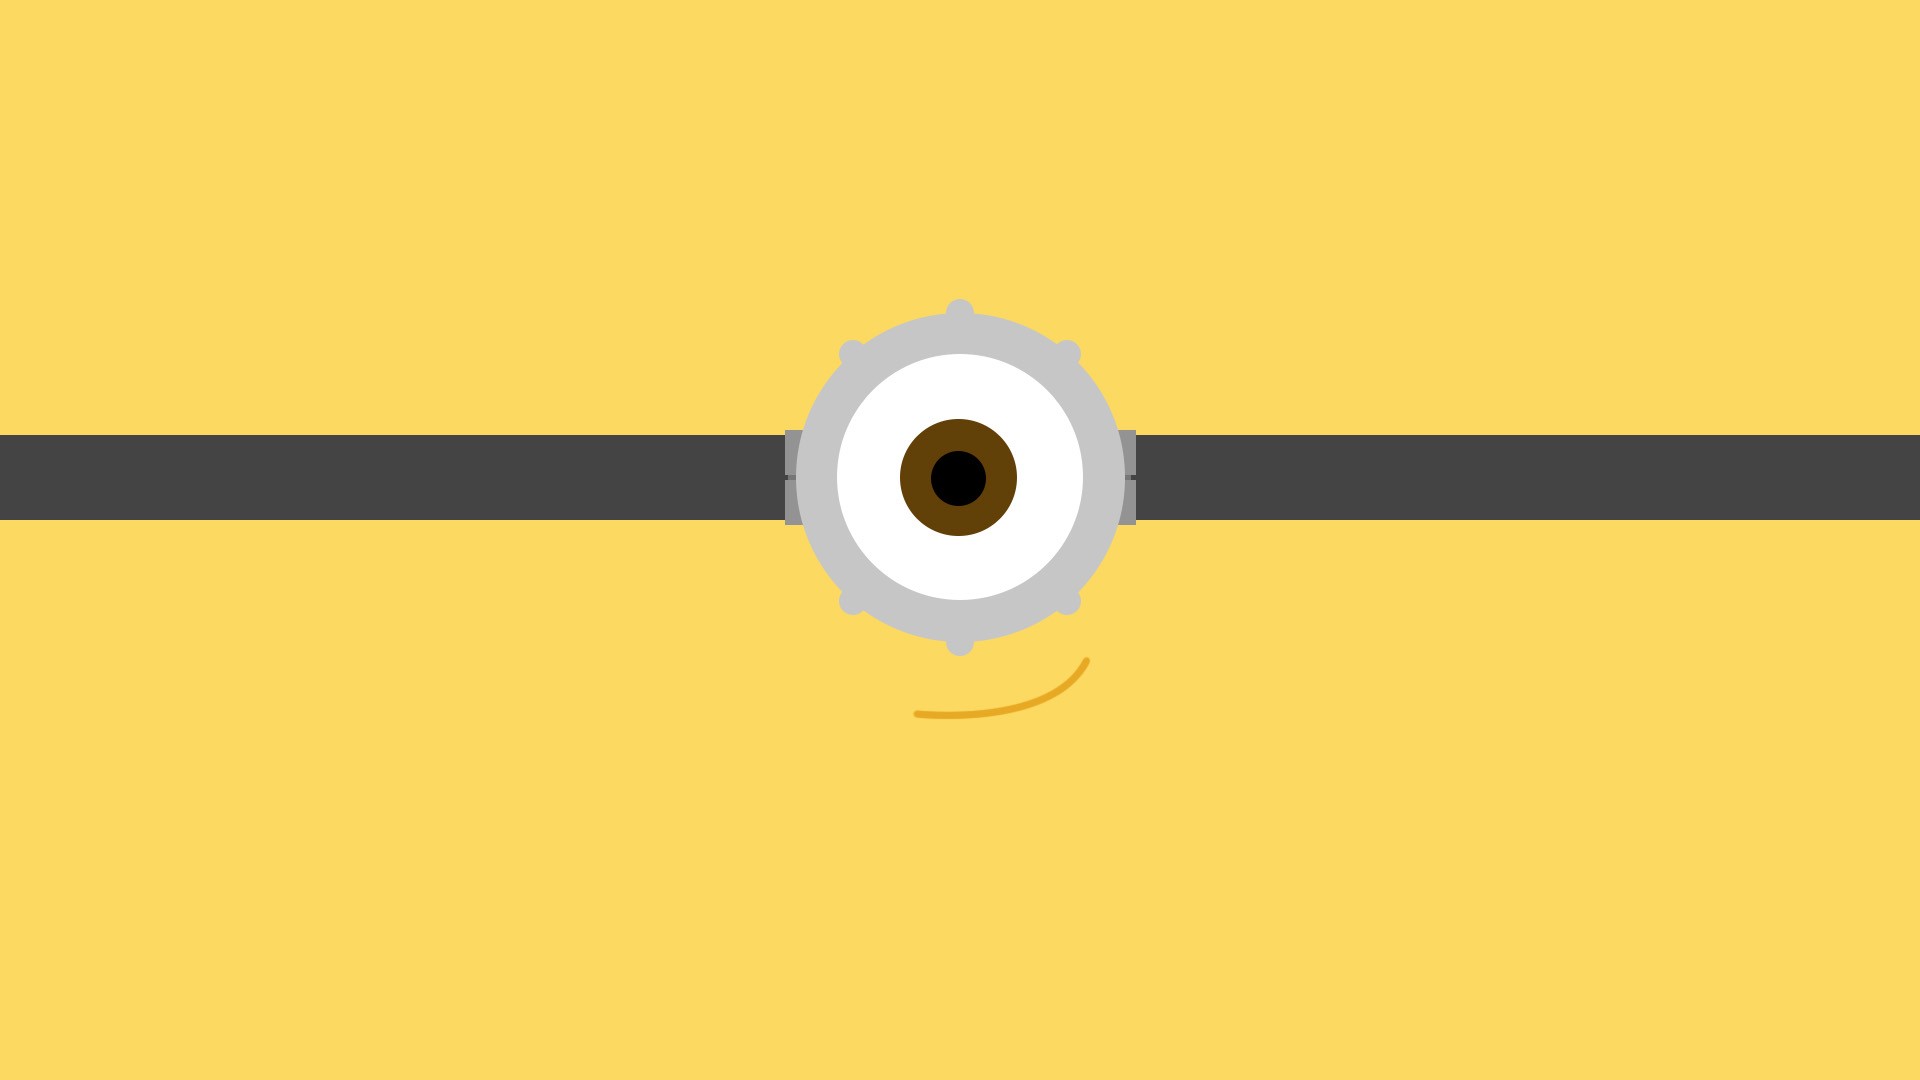 Minions Despicable Me Animated Movies Minimalism Simple Background Movies 1920x1080